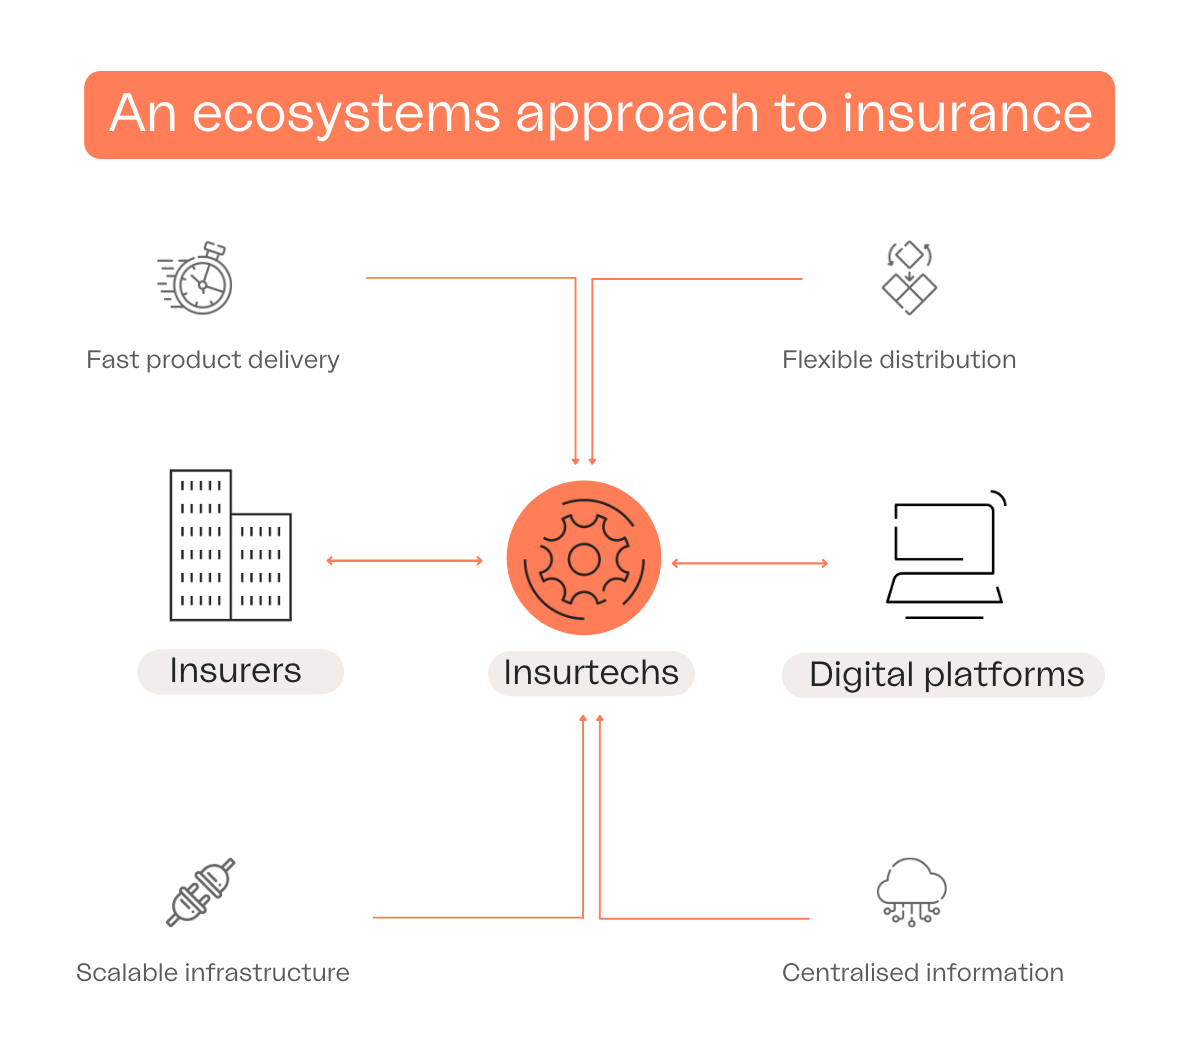 An ecosystems approach to insurance infographic